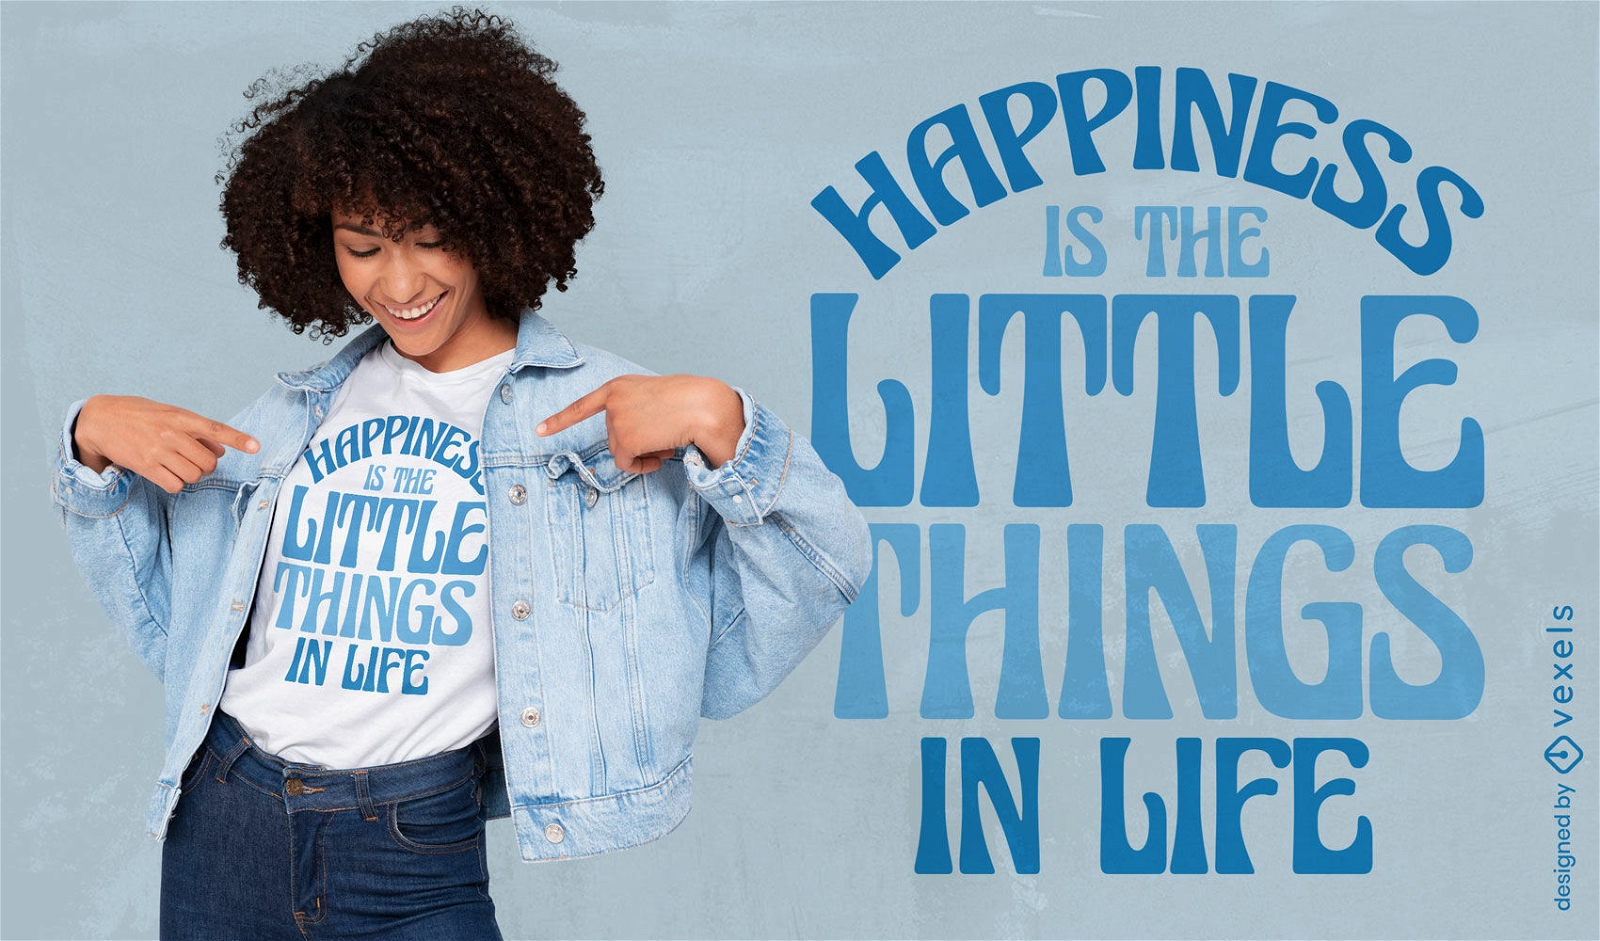 Happiness in life quote t-shirt design